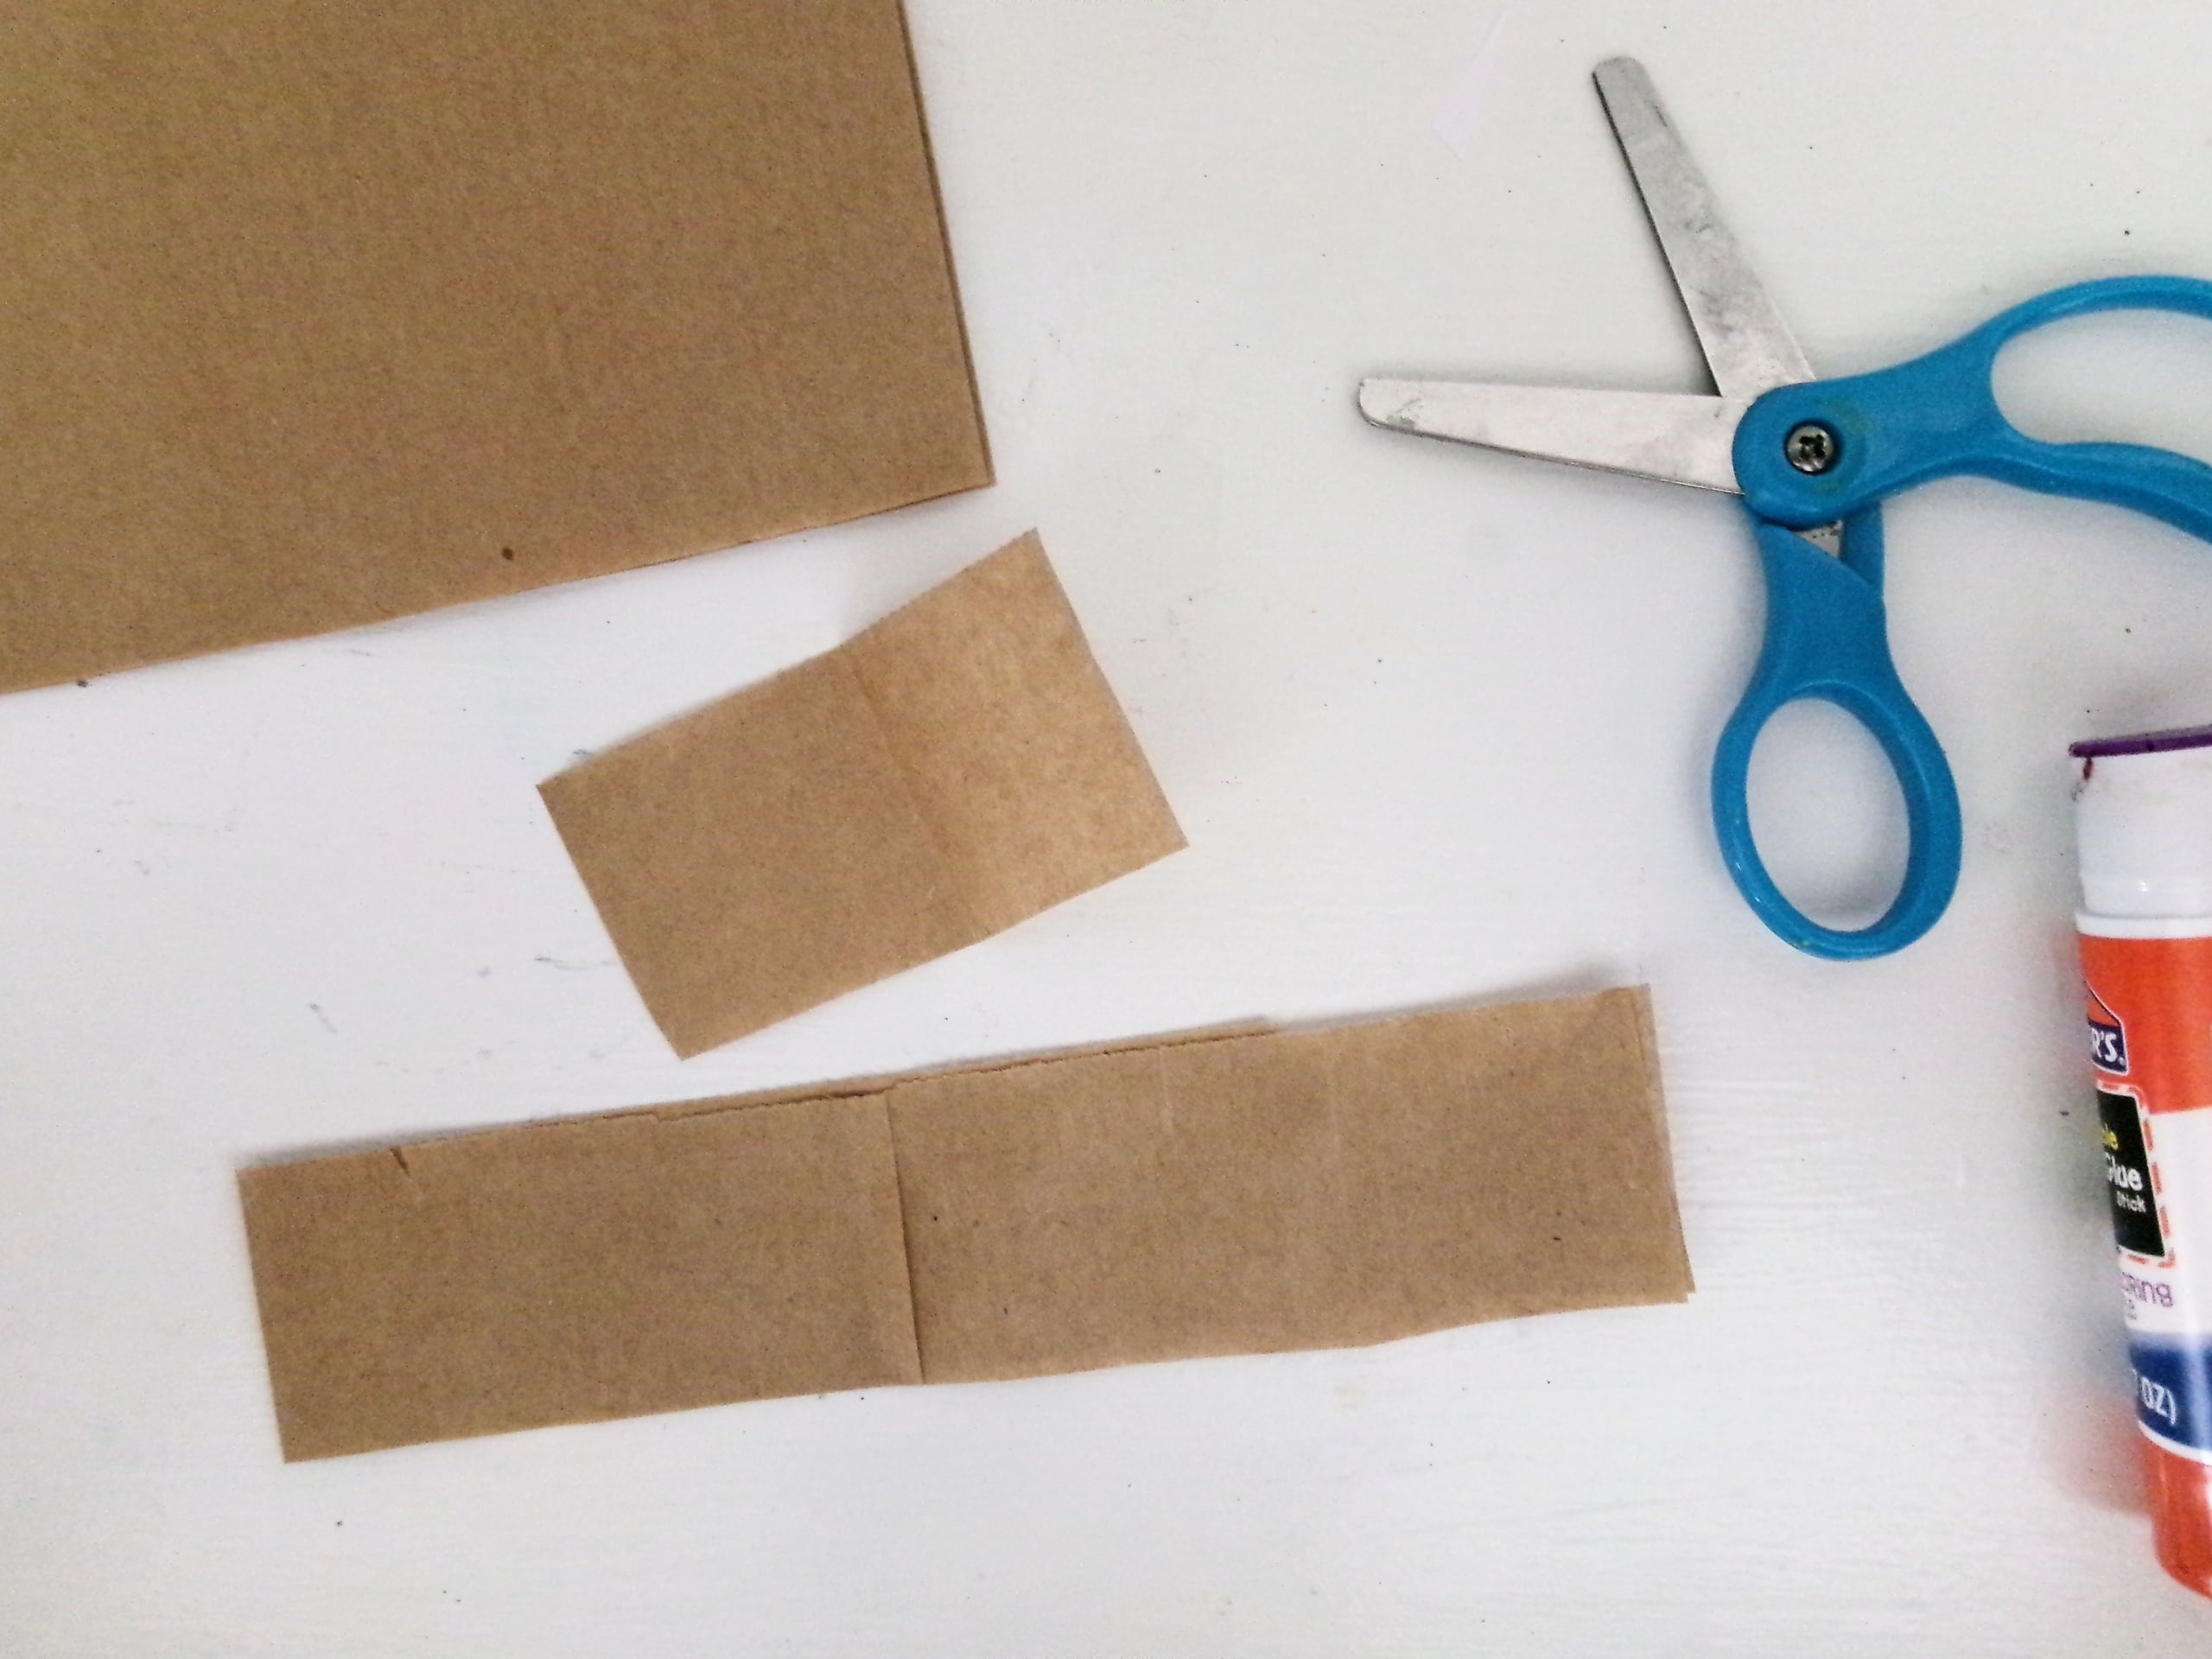 Fold the strip in half and Measure for it to fit the bottom flap of the top of the bag. Cut away excess of the strip.